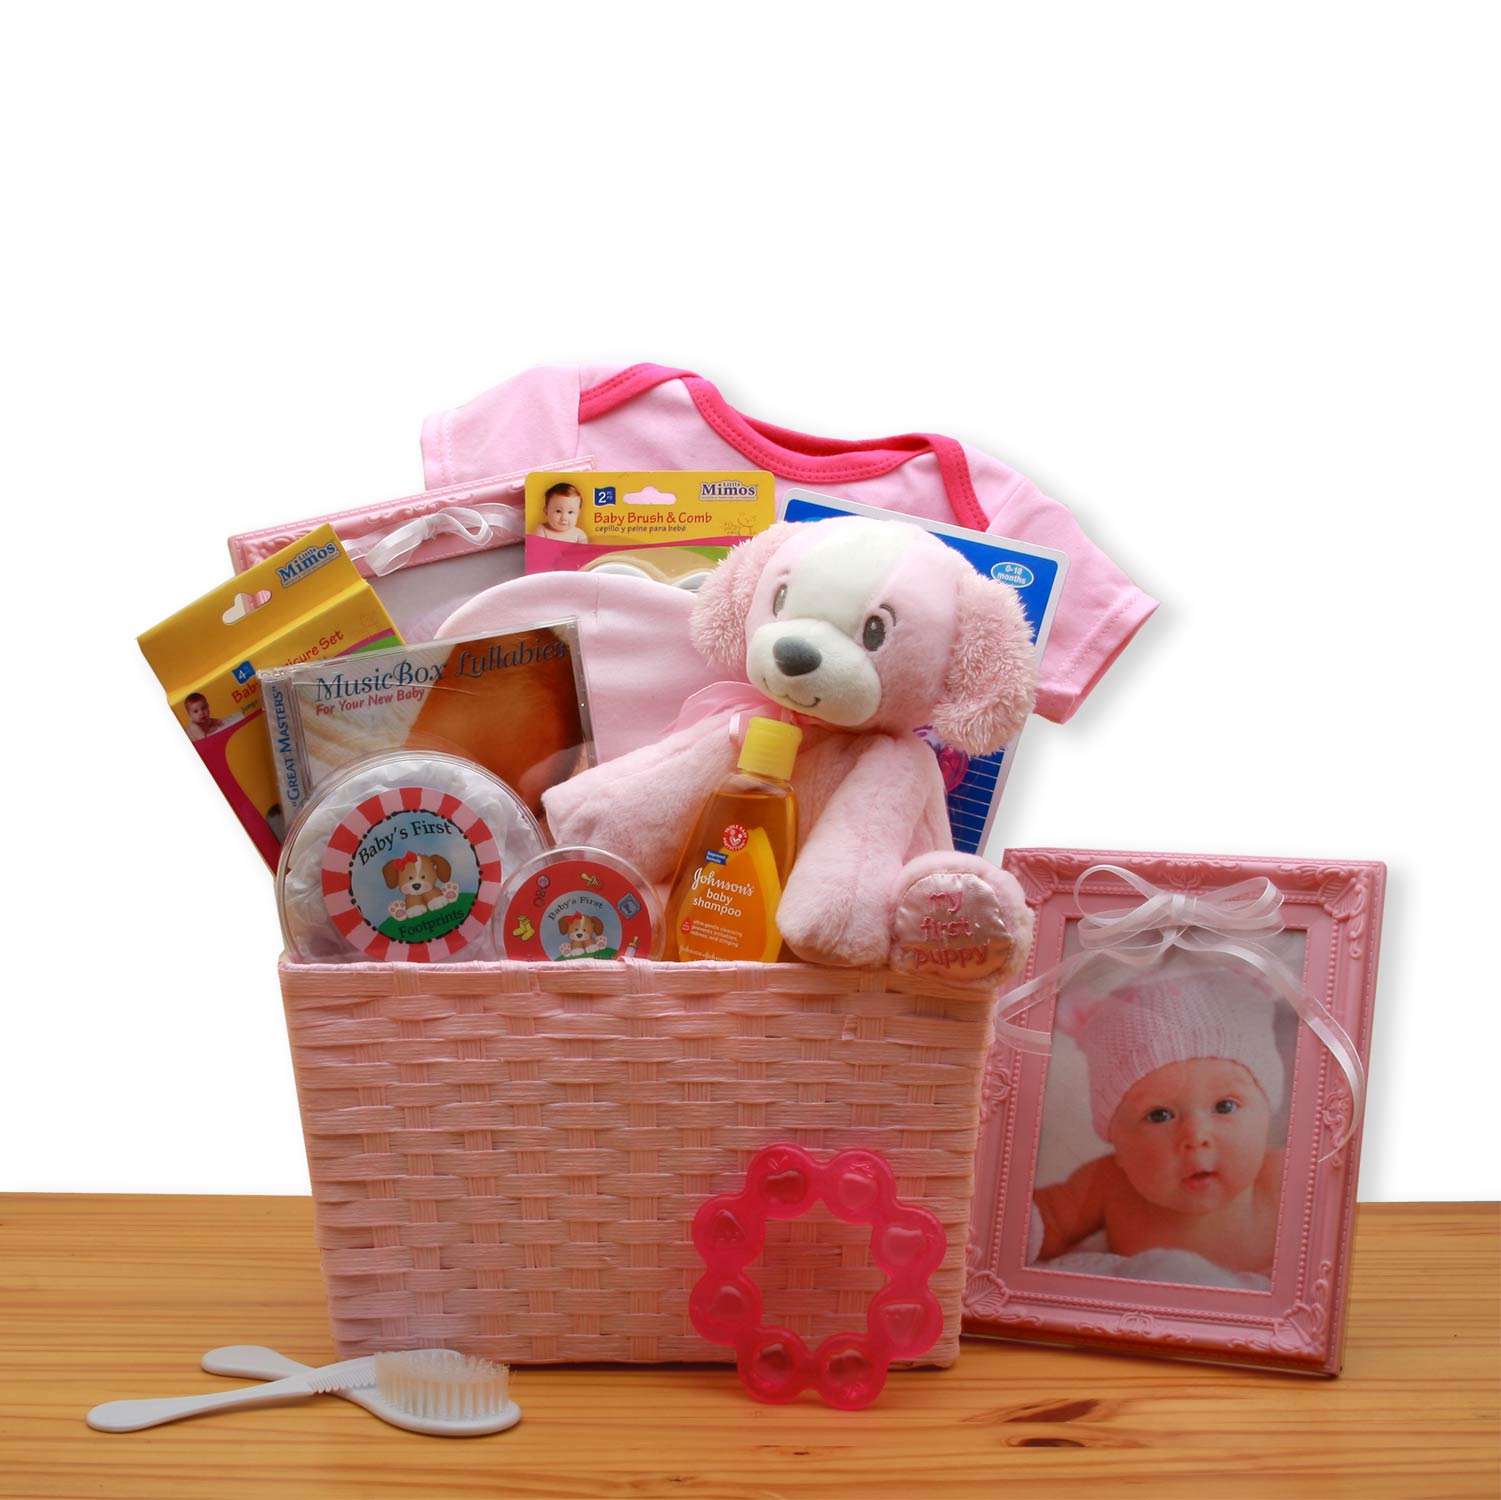 Puppy Love New Baby Gift Basket - Pink - baby bath set -  baby girl gifts - new baby gift basket - baby gift baskets - baby shower gifts